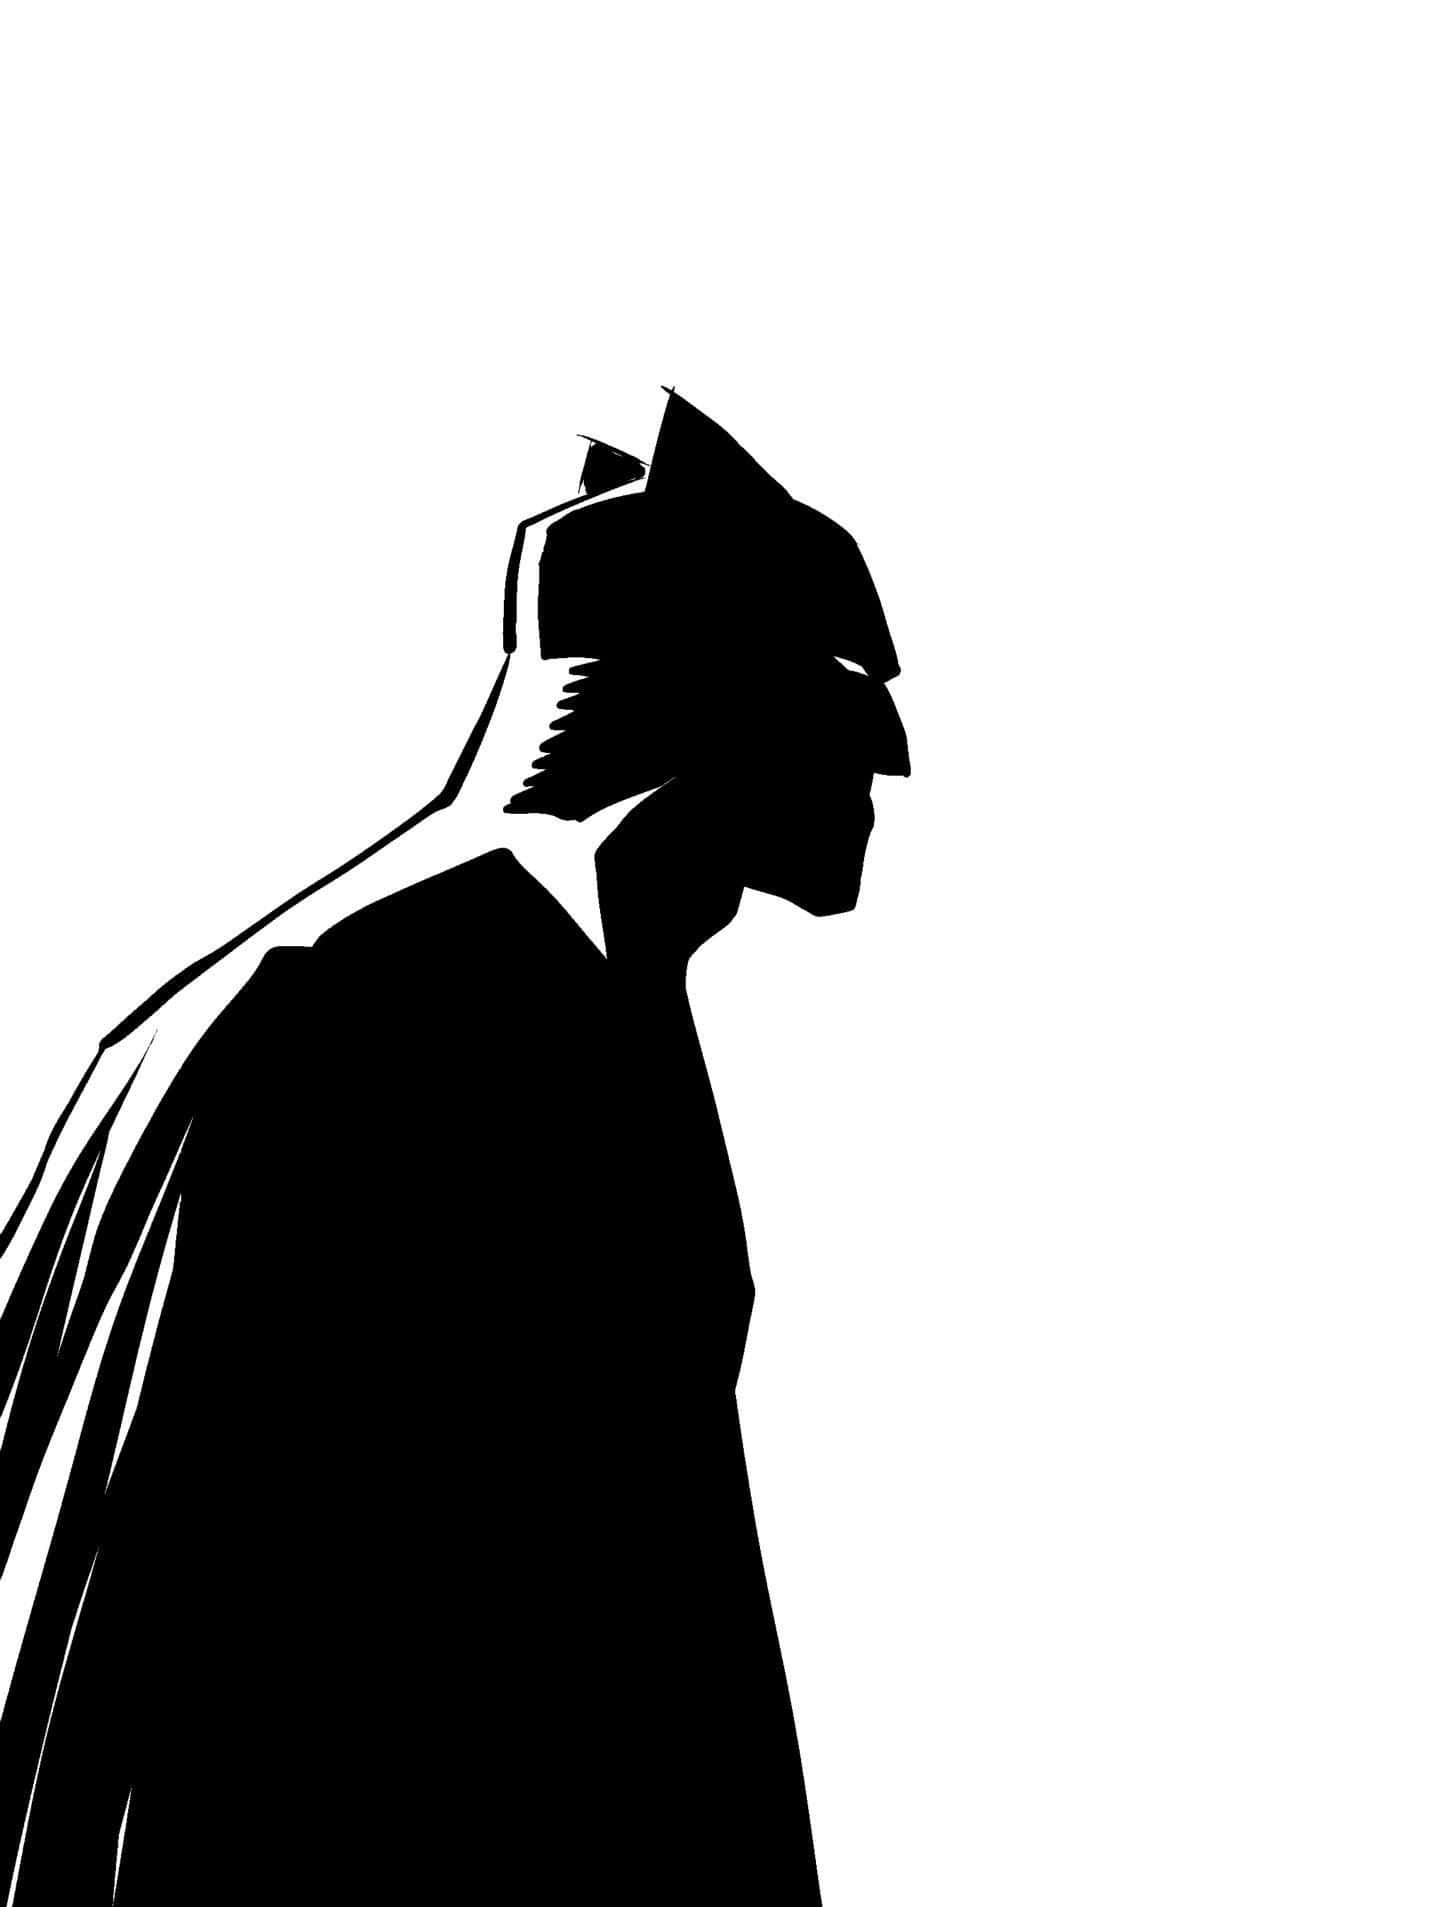 Batman standing tall in black and white Wallpaper